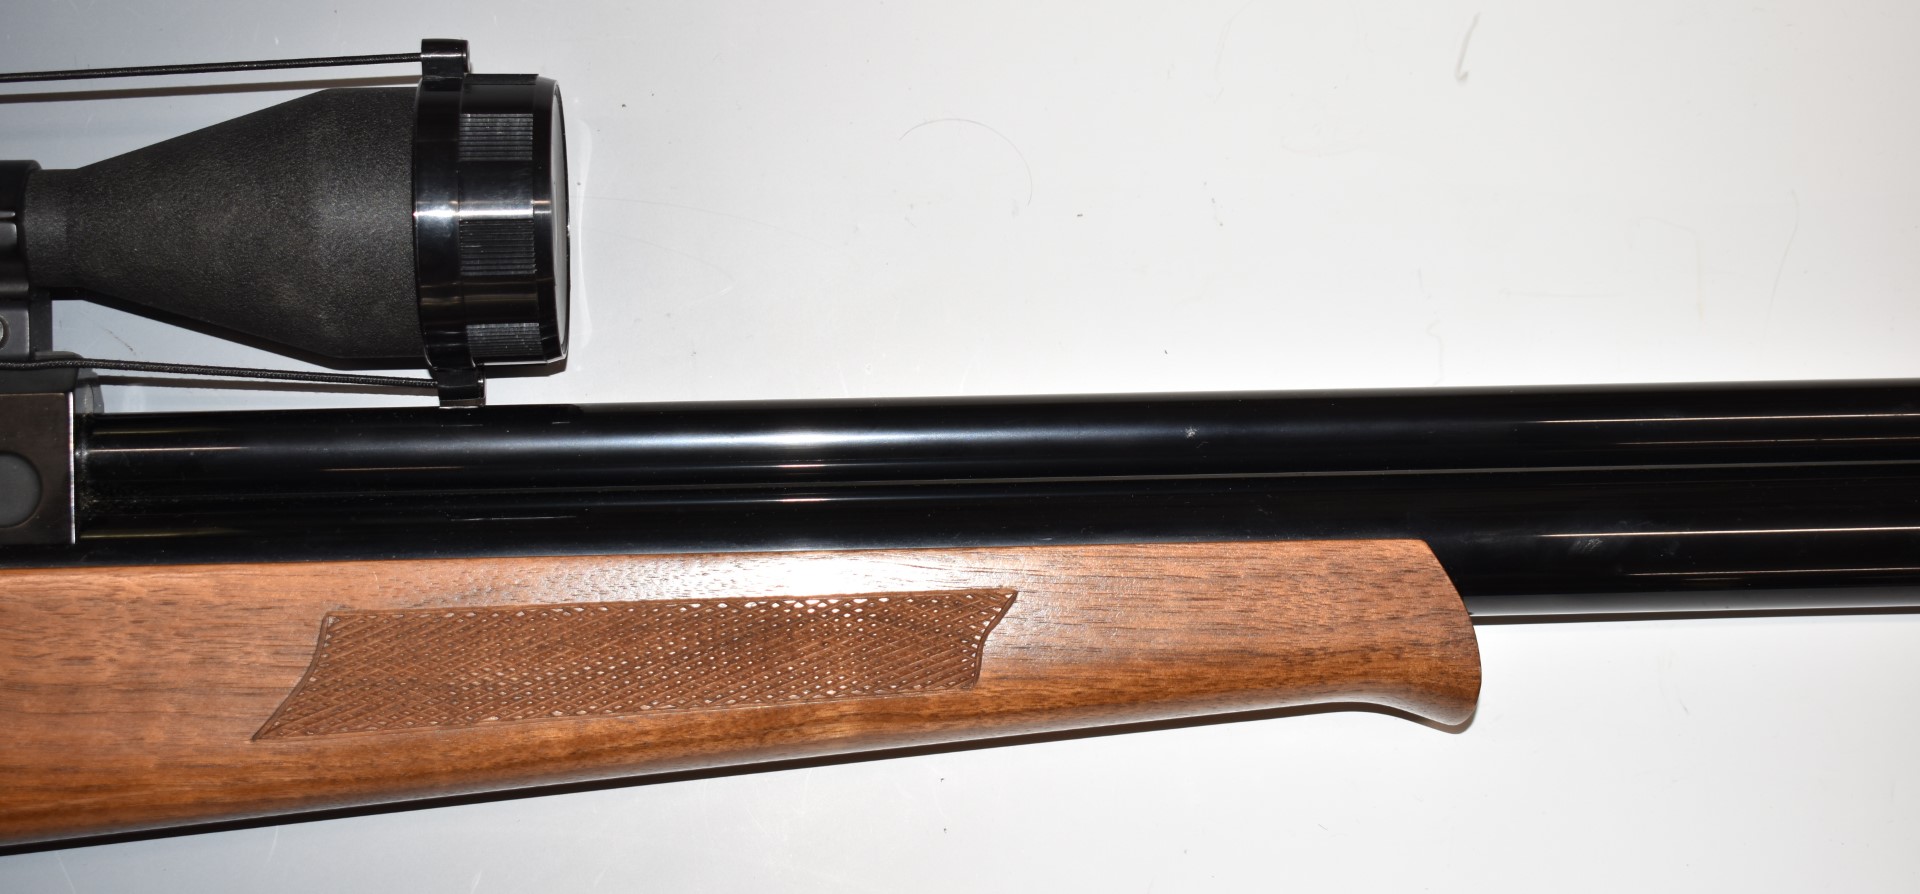 Ripley Rifles XL9 .22 PCP air rifle with nine shot magazine, chequered semi-pistol grip and - Image 5 of 10